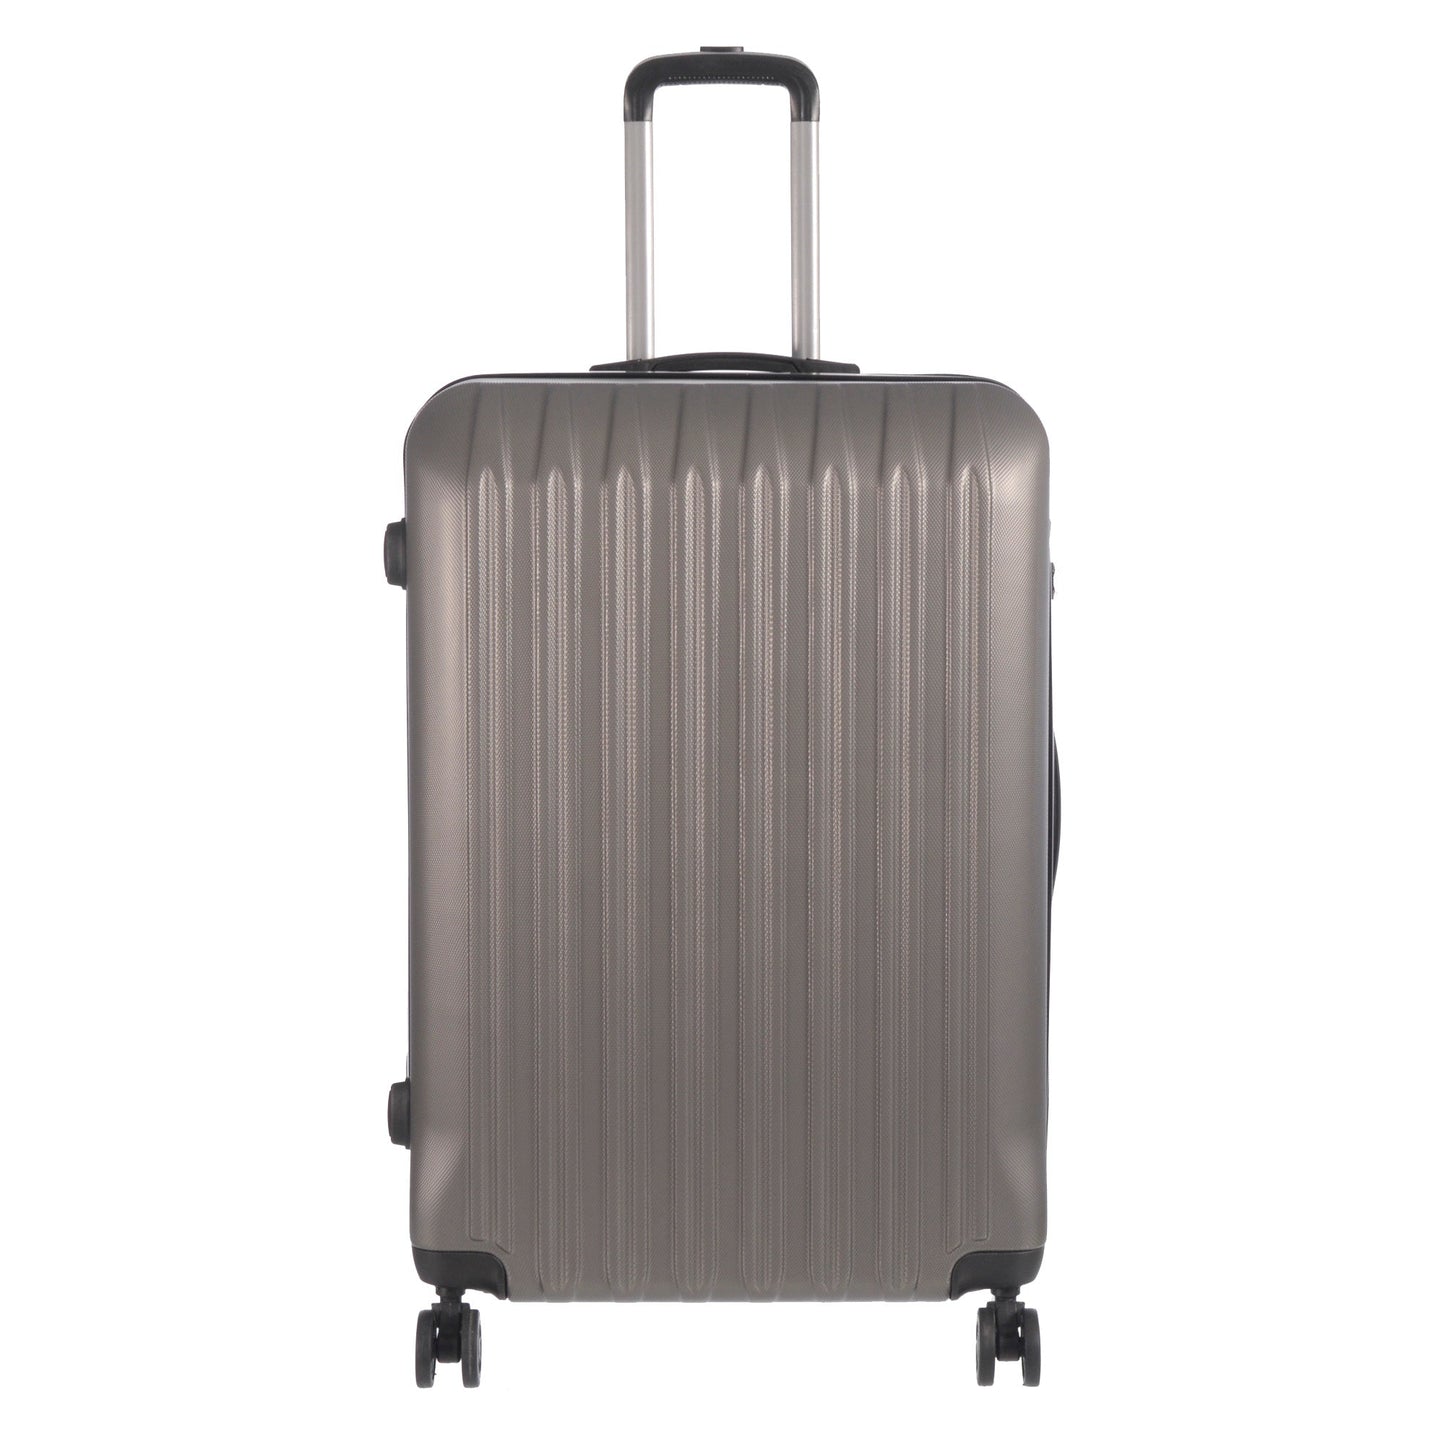 28" Large Size Luggage Grove Collection